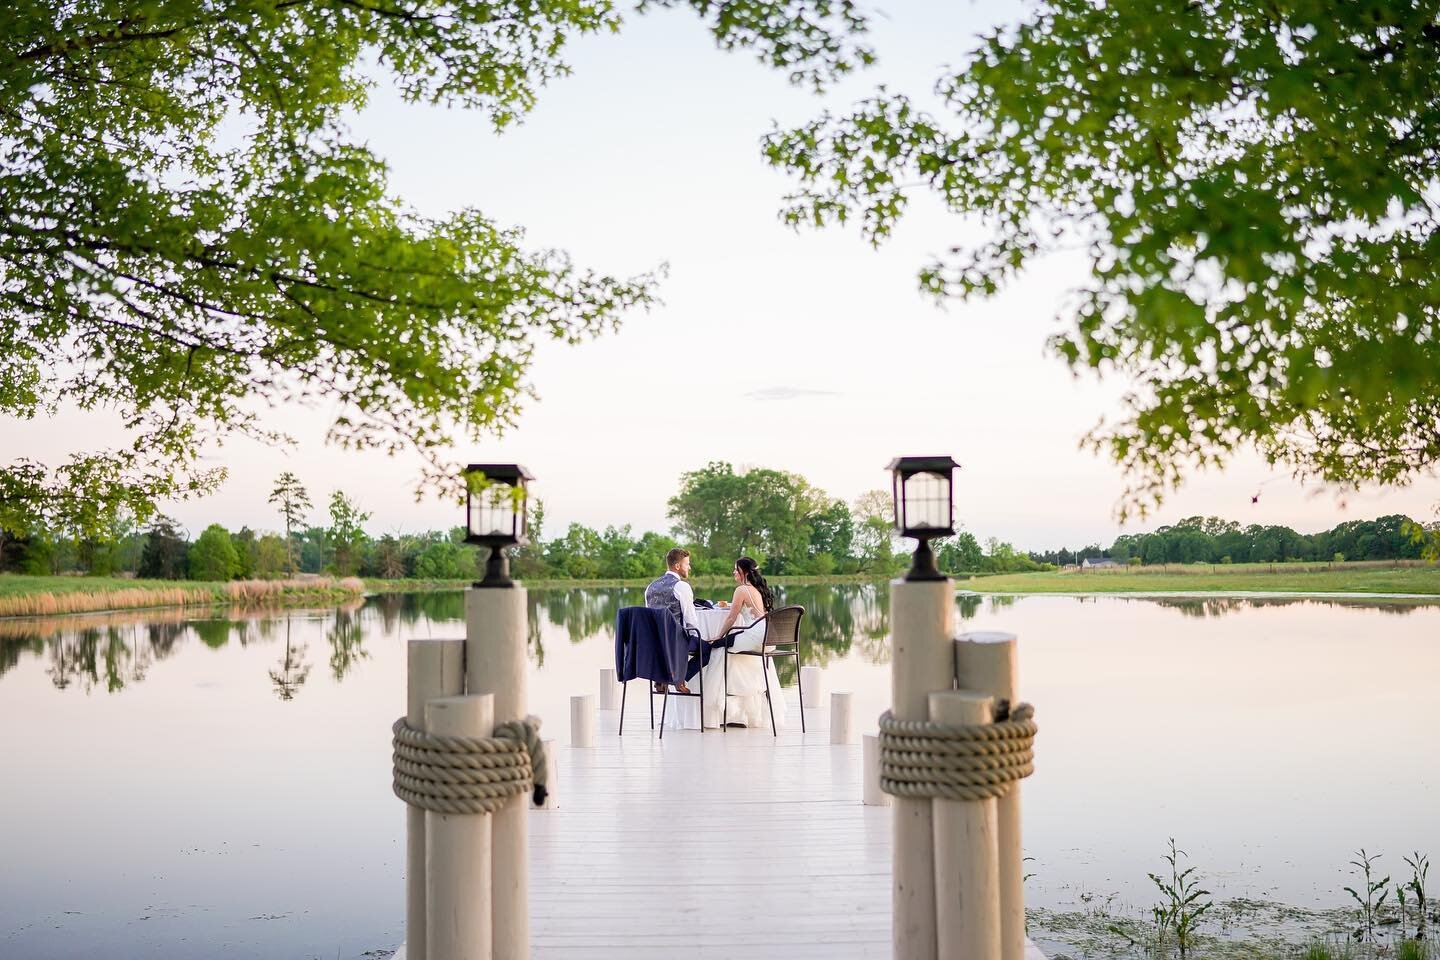 Sneaking away for a private dinner and a few minutes to soak in just becoming husband + wife is always a good idea&hellip; especially with this view 🌙🌅🍷

#ncwedding #ncweddings #ncweddingphotographer #cltweddingphotographer #cltweddings #cltphotog